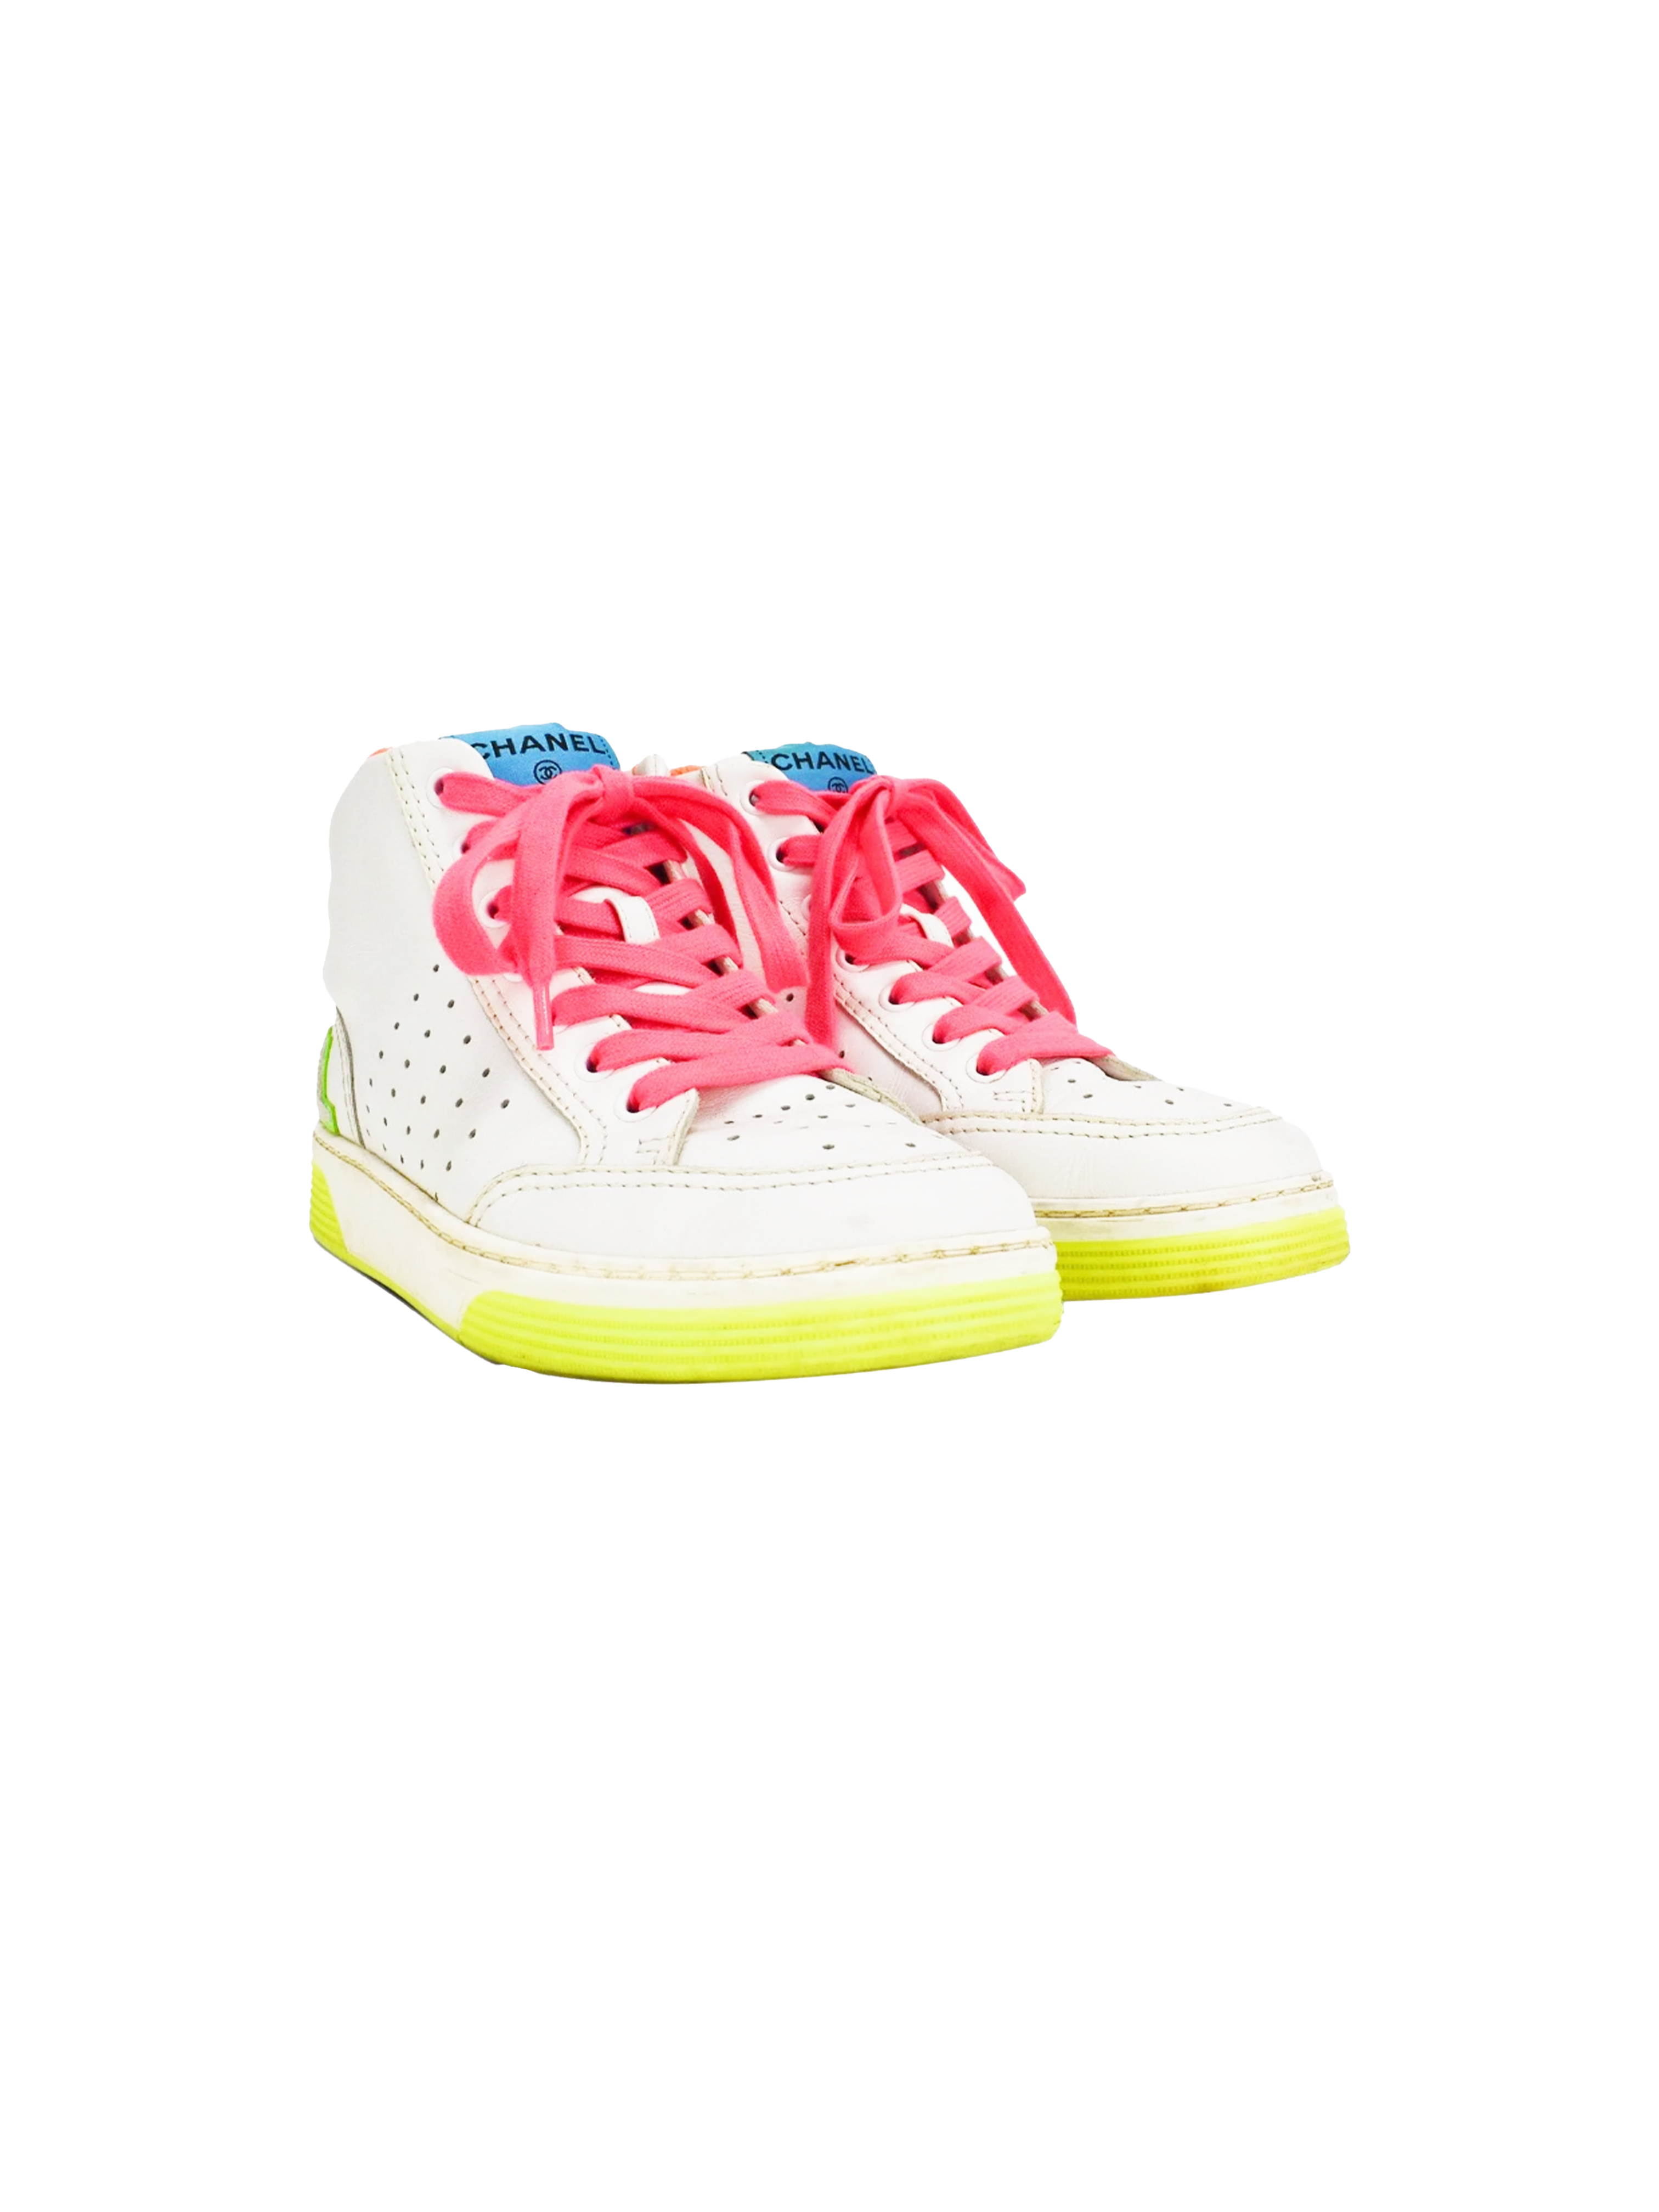 chanel high tops neon pink  Chanel sneakers, Sneakers, Sneakers nike